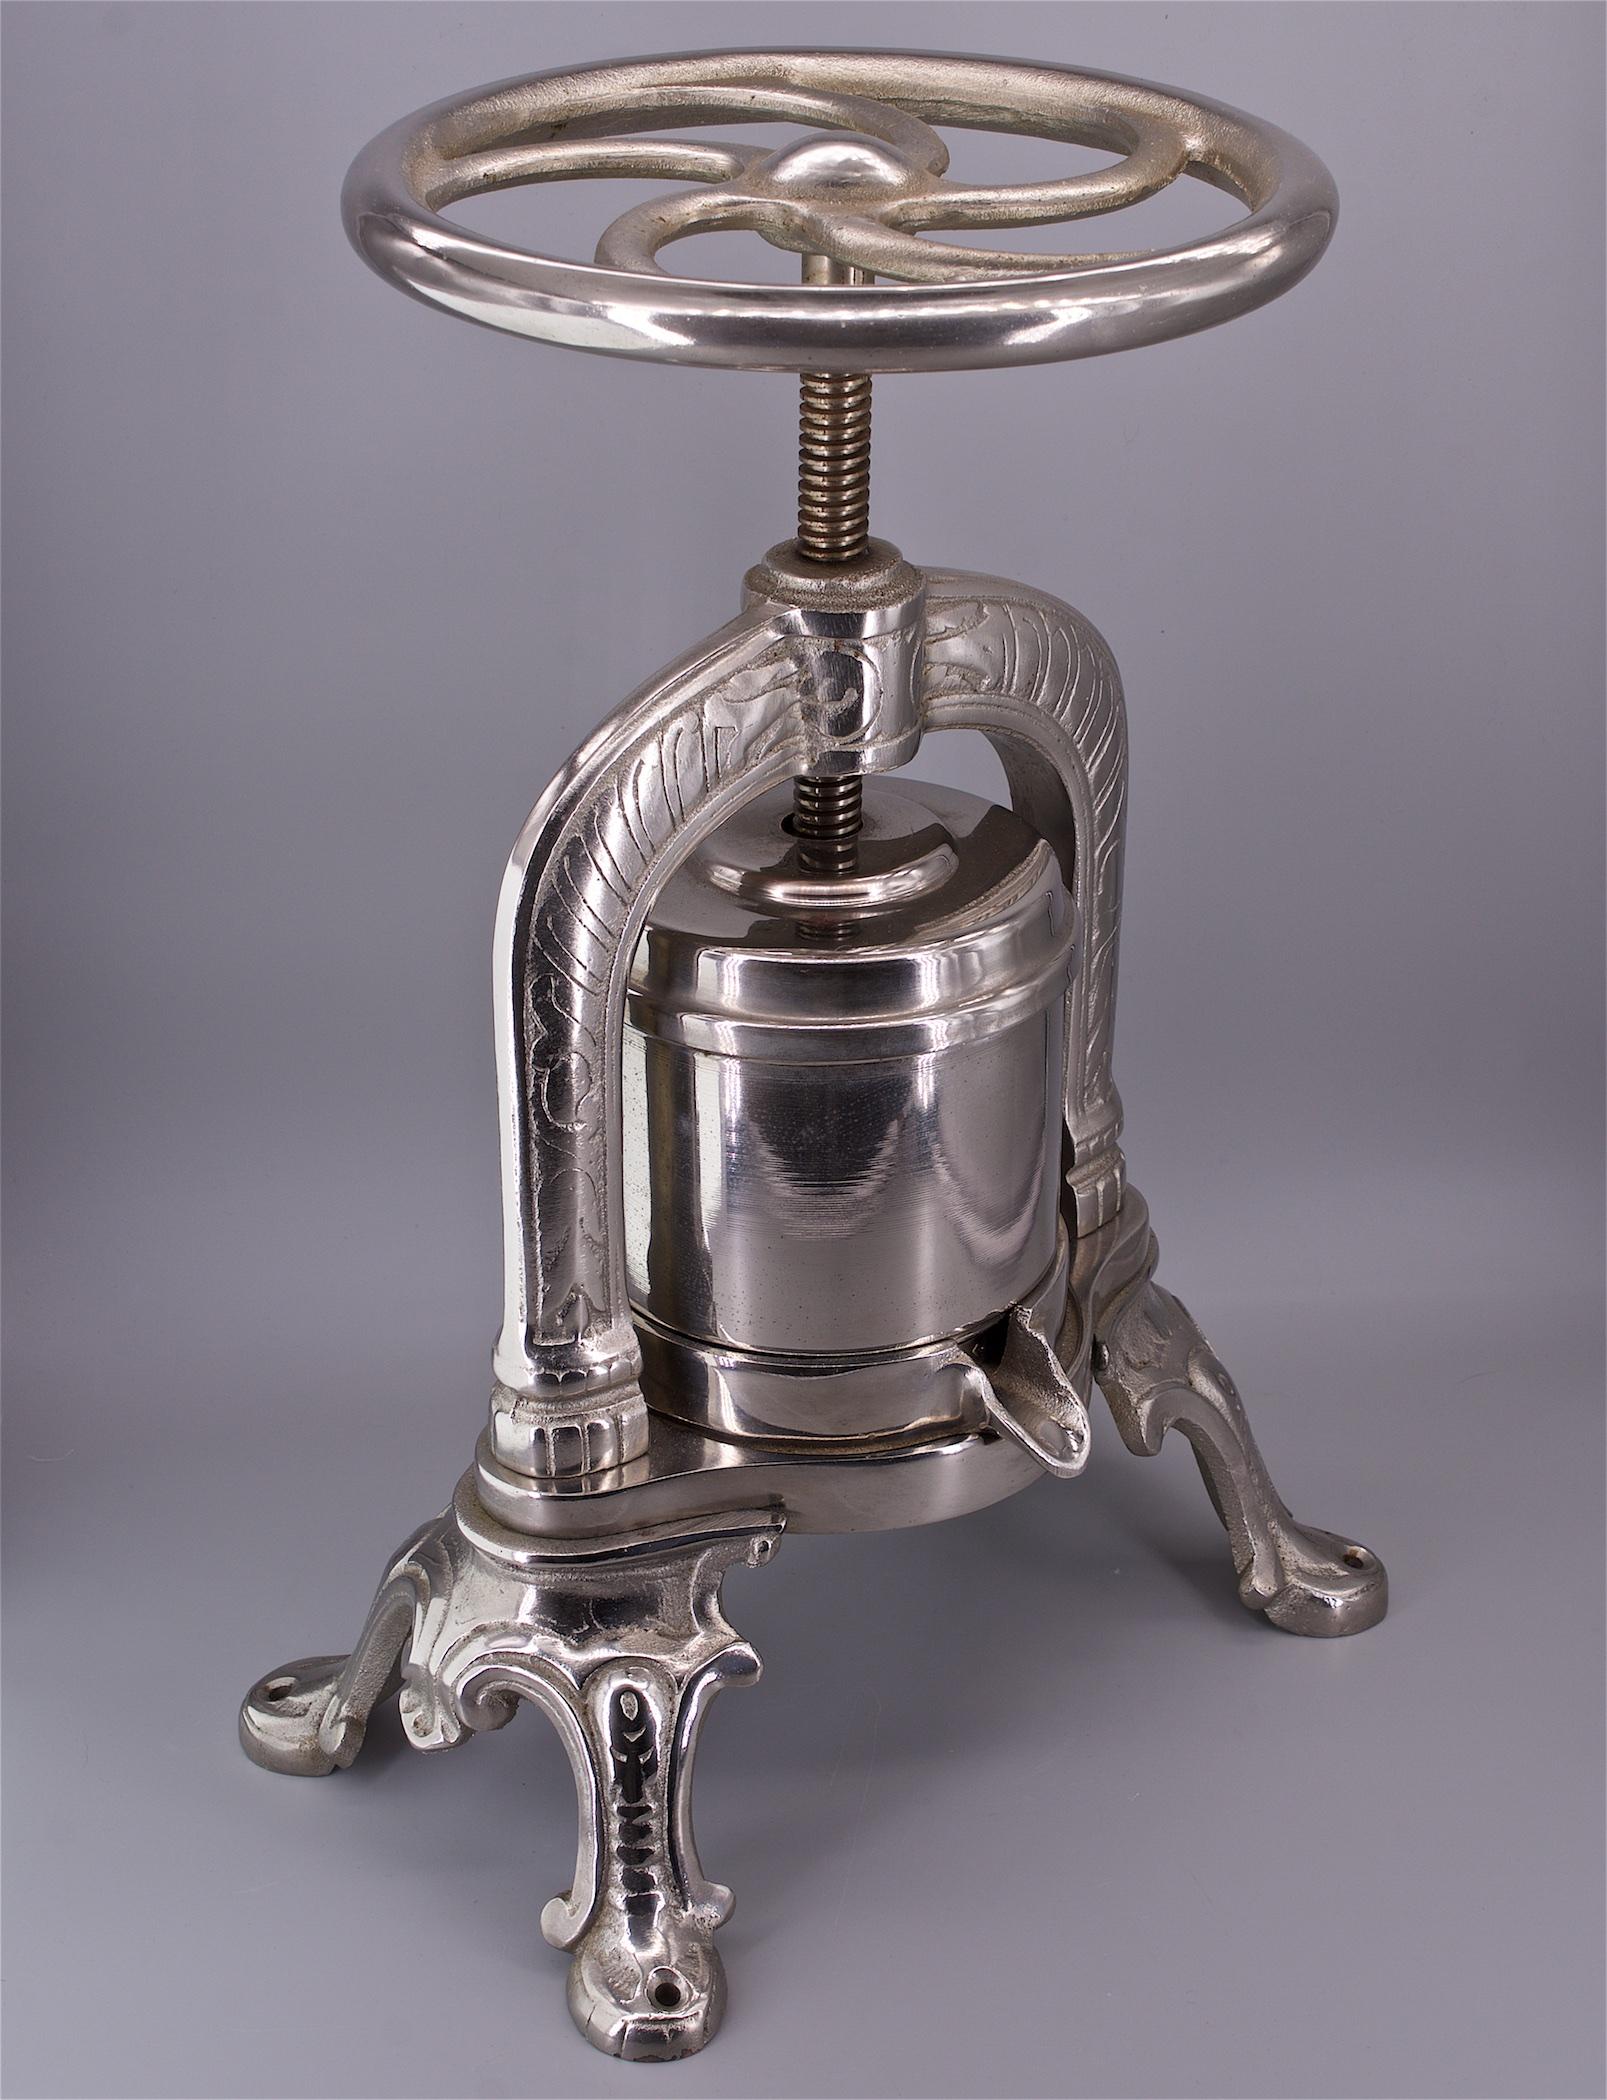 Plated 1900s Polished Nickel French Duck Lobster Press Culinary Cooking Matfer Bourgeat